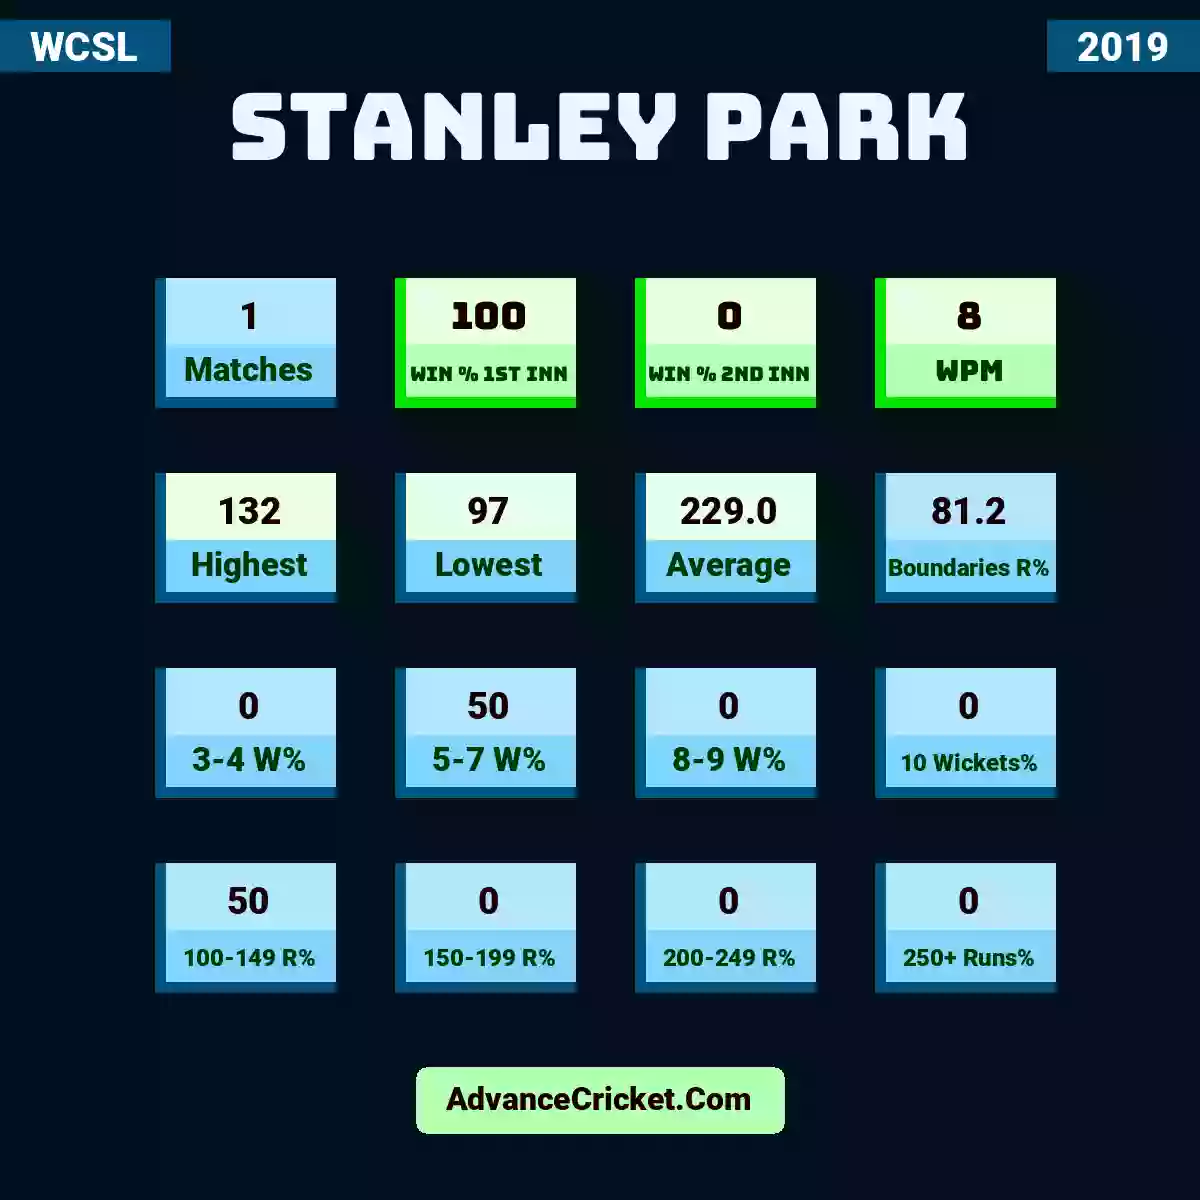 Image showing Stanley Park with Matches: 1, Win % 1st Inn: 100, Win % 2nd Inn: 0, WPM: 8, Highest: 132, Lowest: 97, Average: 229.0, Boundaries R%: 81.2, 3-4 W%: 0, 5-7 W%: 50, 8-9 W%: 0, 10 Wickets%: 0, 100-149 R%: 50, 150-199 R%: 0, 200-249 R%: 0, 250+ Runs%: 0.